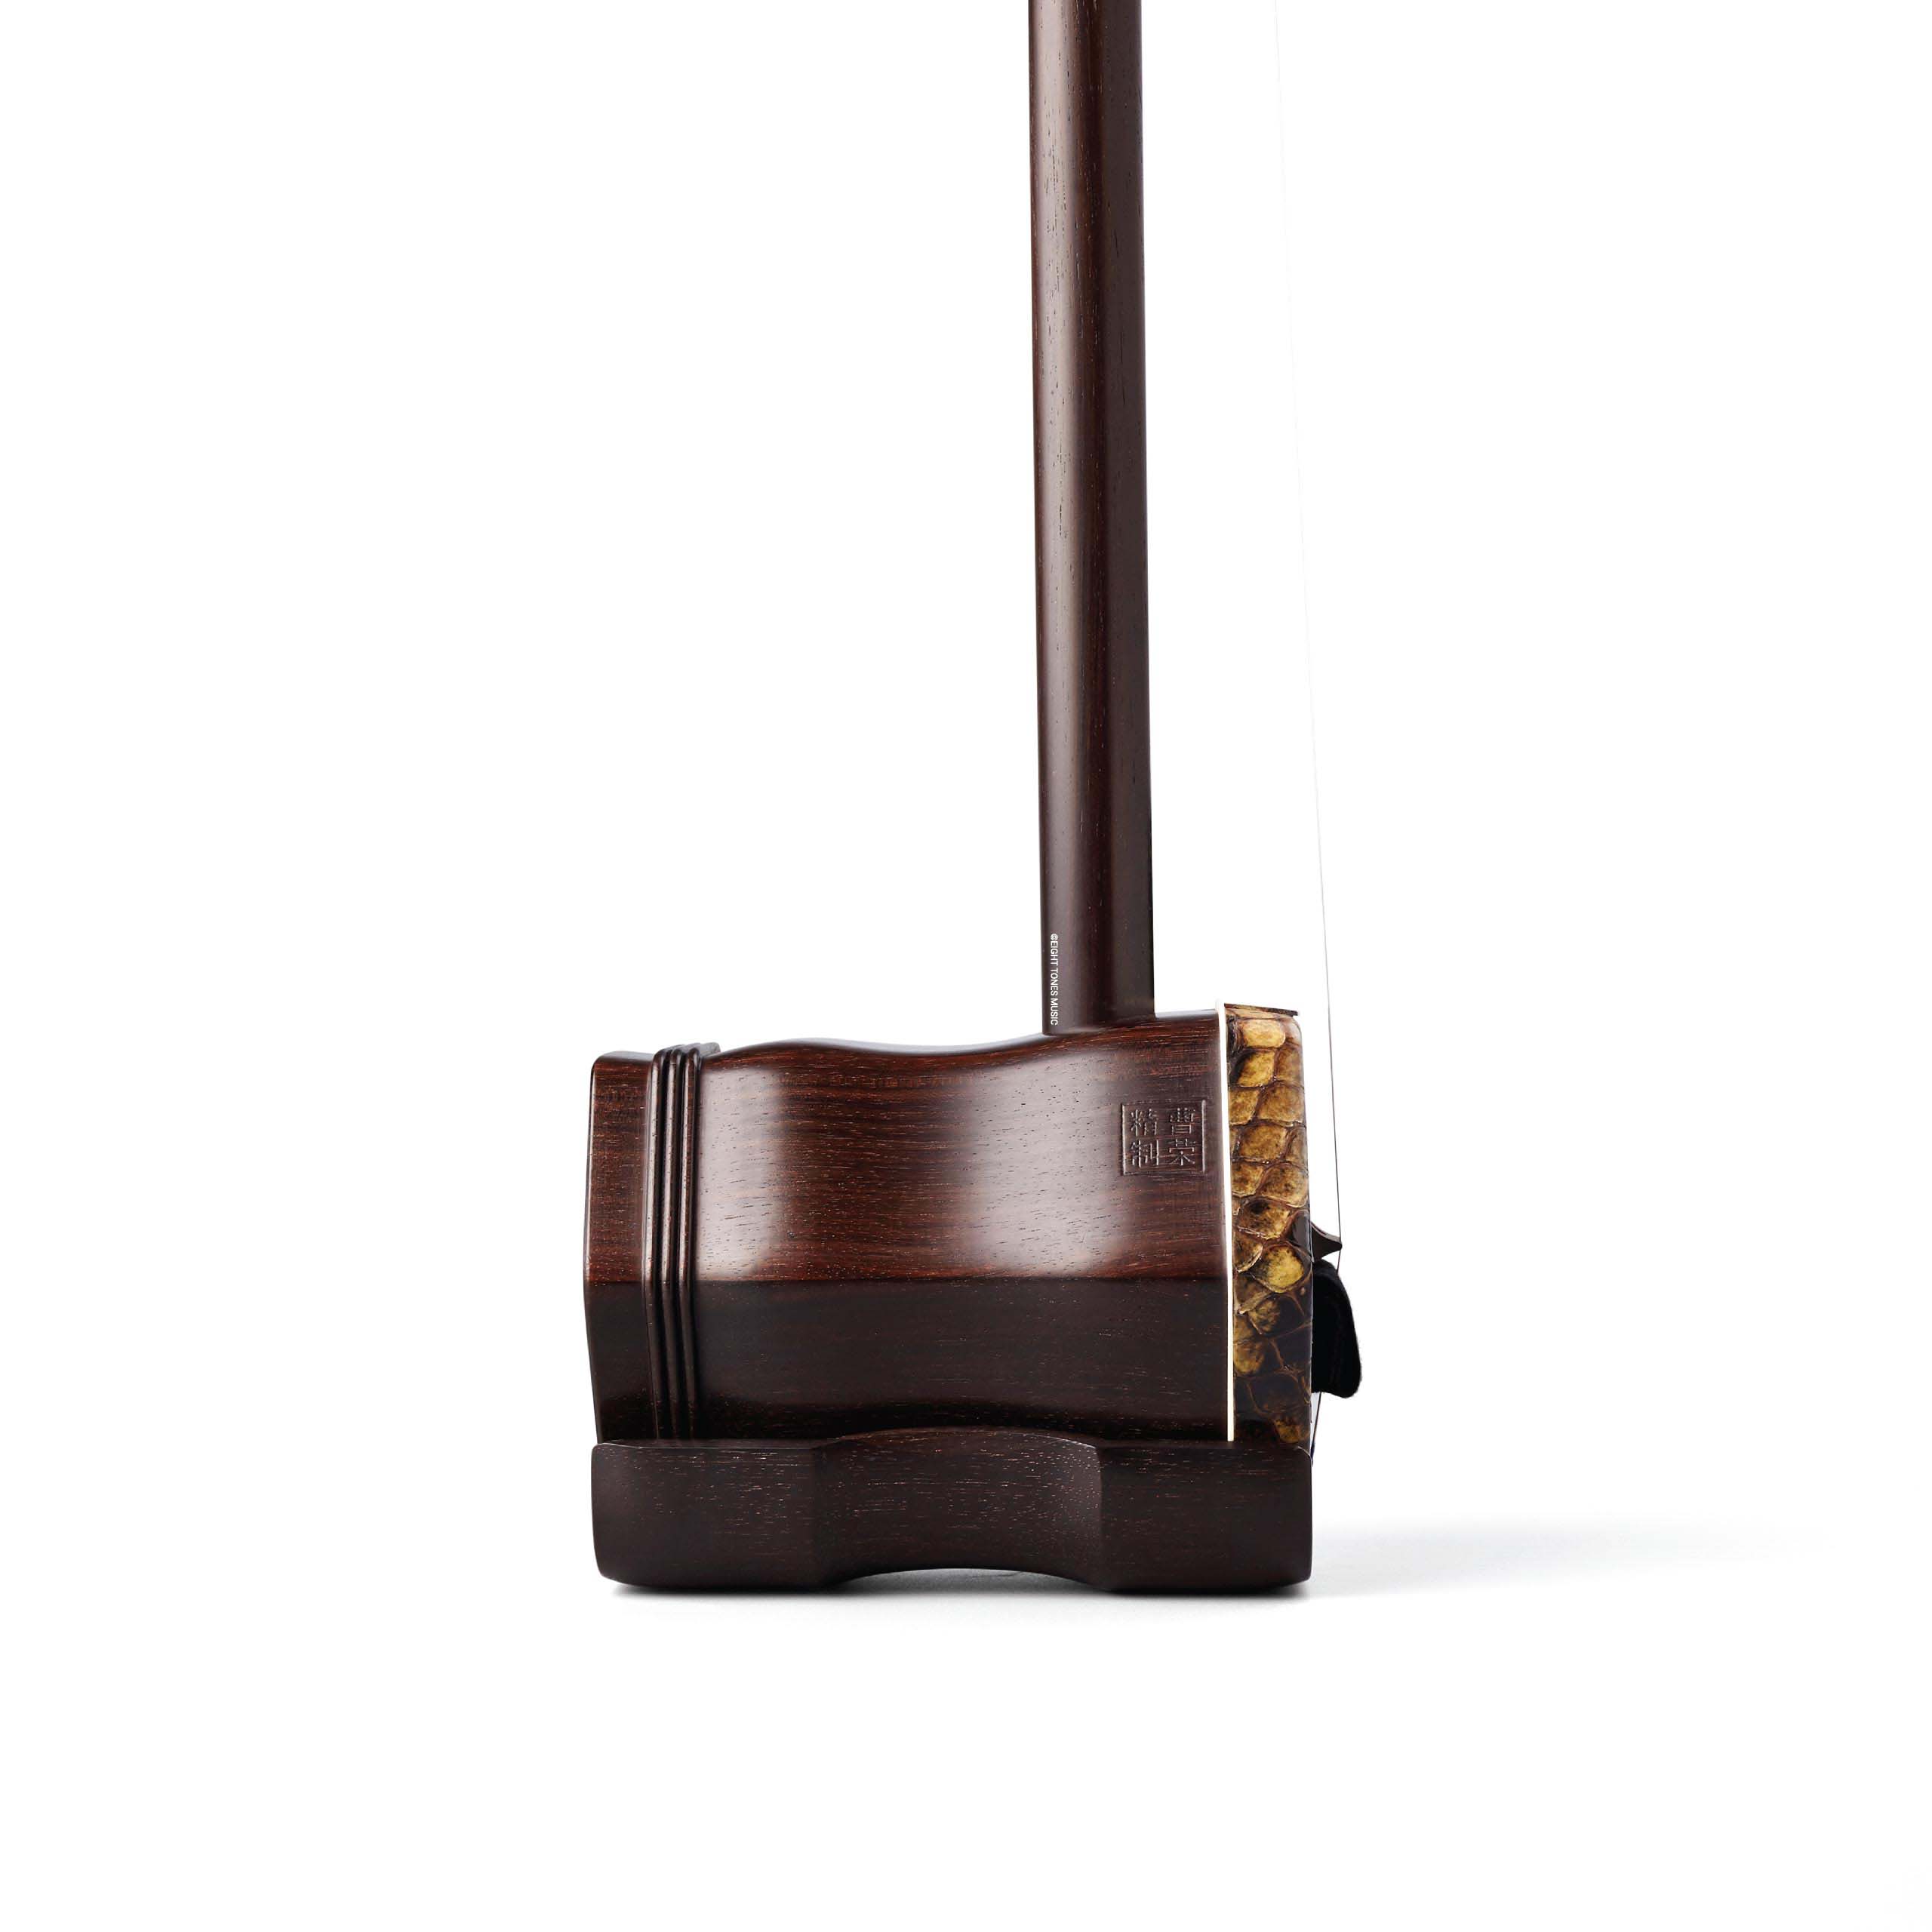 Cao Rong 2nd Grade Aged Rosewood Erhu right